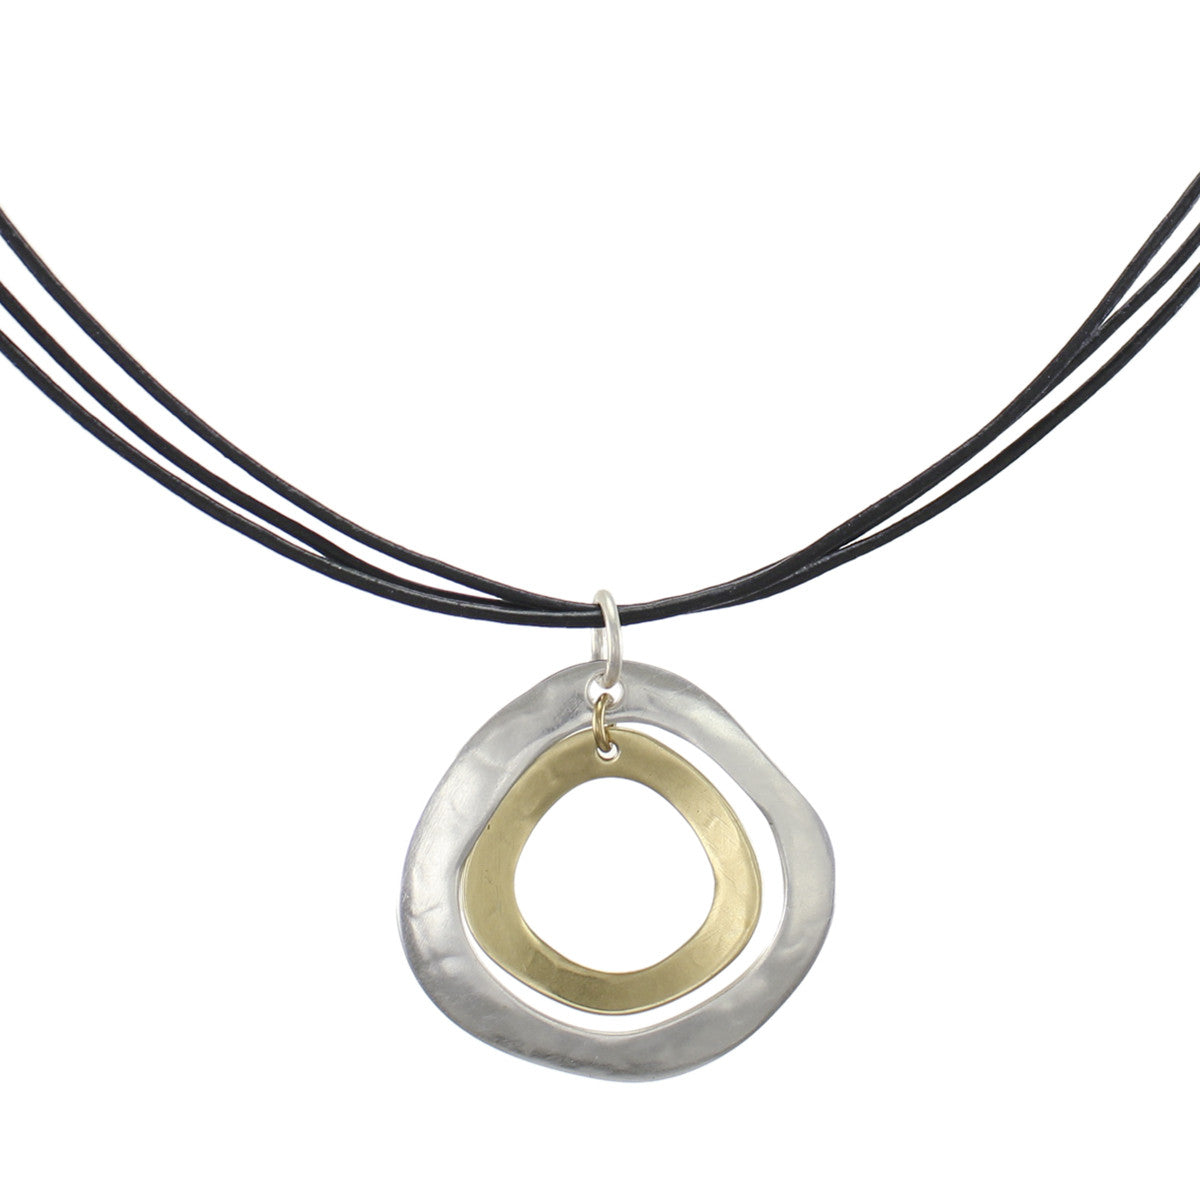 Organic Rings on Black Cord Necklace